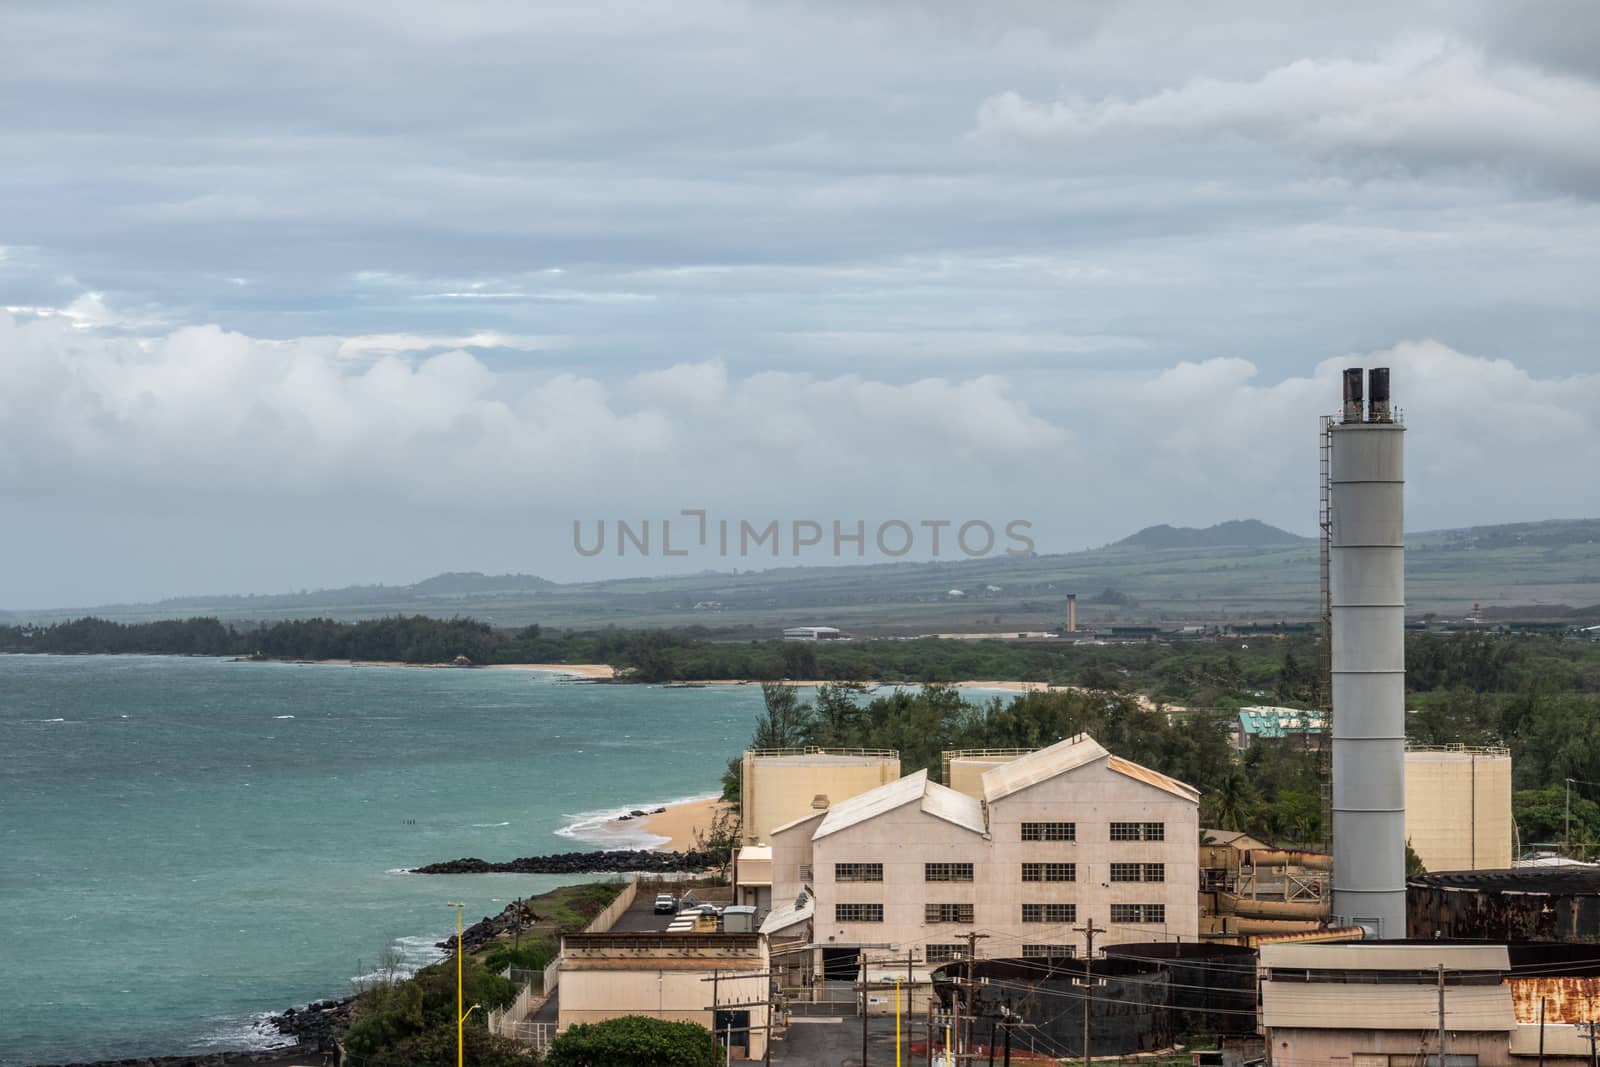 Kahului, Maui,, Hawaii, USA. - January 13, 2020: Old defunt sugarcane processing plant in harbor area bordering the azure ocean, under cloudscape with green hills and forest in back.